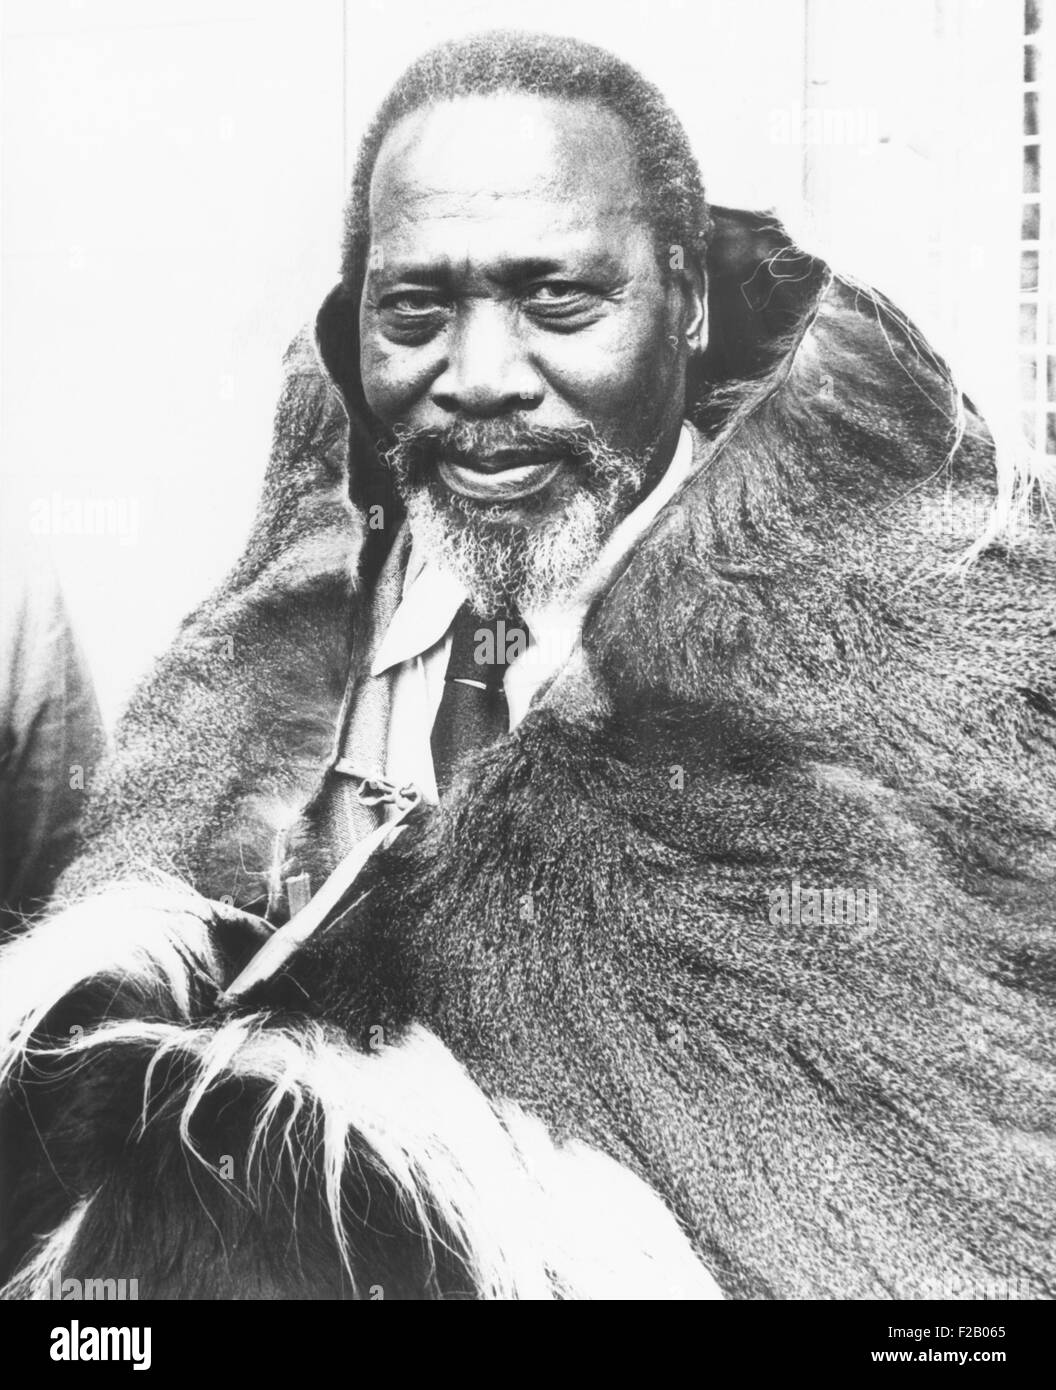 Jomo Kenyatta, future President of Kenya, in a monkey skin given him by Kikuyu (Gikuyu) tribesmen. Aug. 21, 1961. Kikuyu was the largest ethnic group in Kenya, but still represented less than 25% of the population. As leader of Kenya's KANU (Kenya African National Union) Kenyatta  advocated, unified state with a strong central government over an ethnic-federal state favored by his opposition. (CSU 2015 9 683) Stock Photo